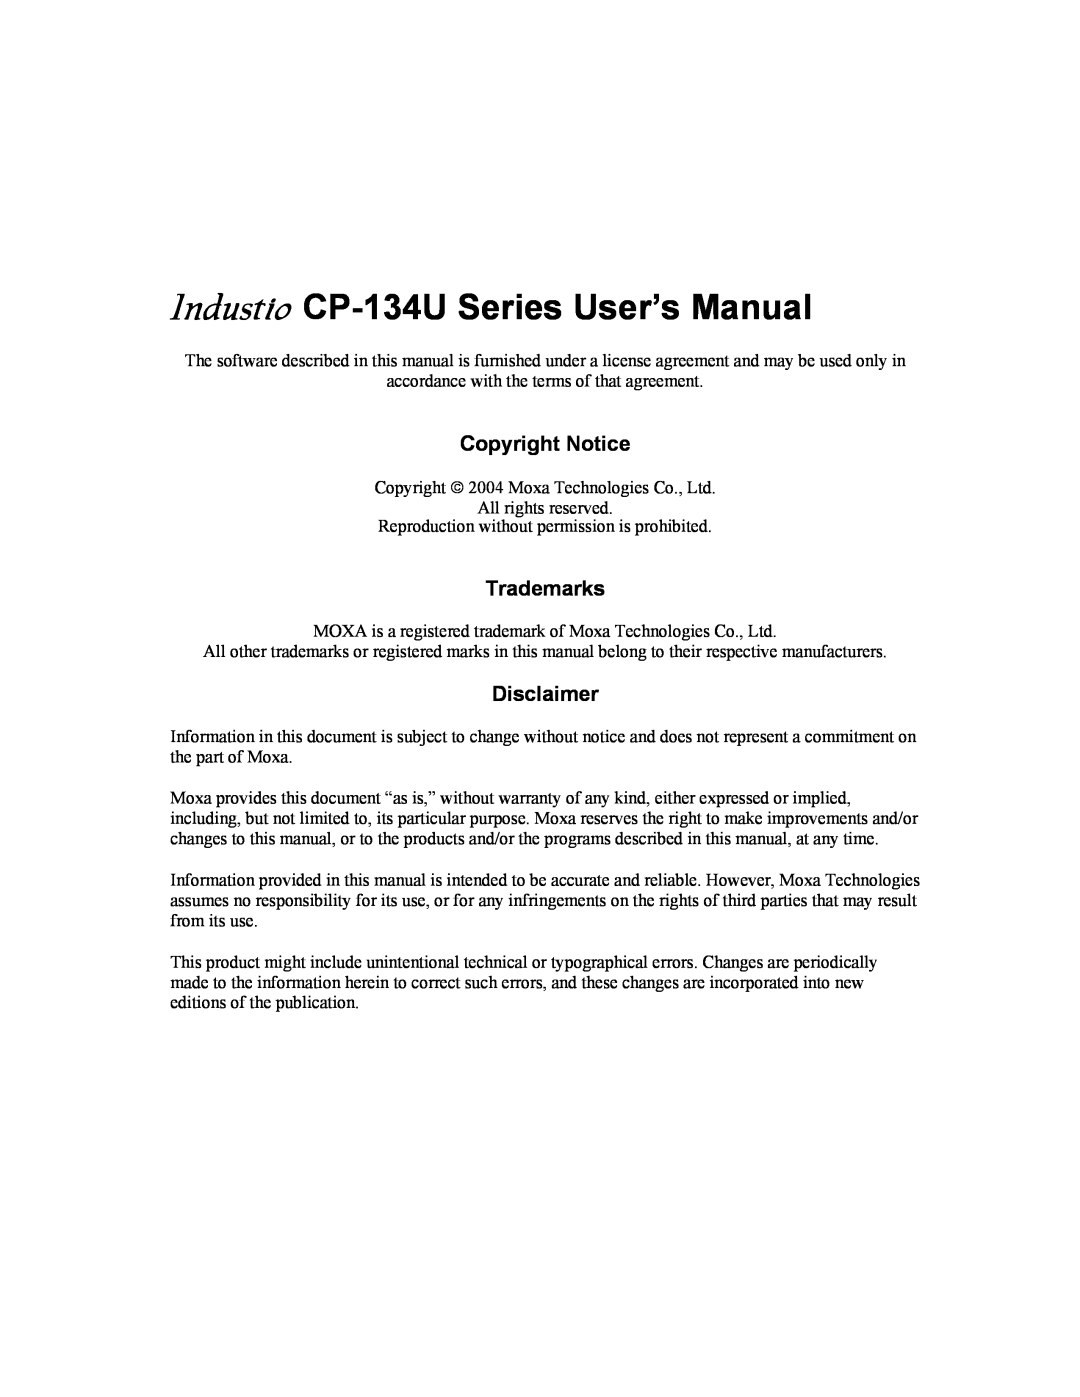 Moxa Technologies user manual Copyright Notice, Trademarks, Disclaimer, Industio CP-134U Series User’s Manual 